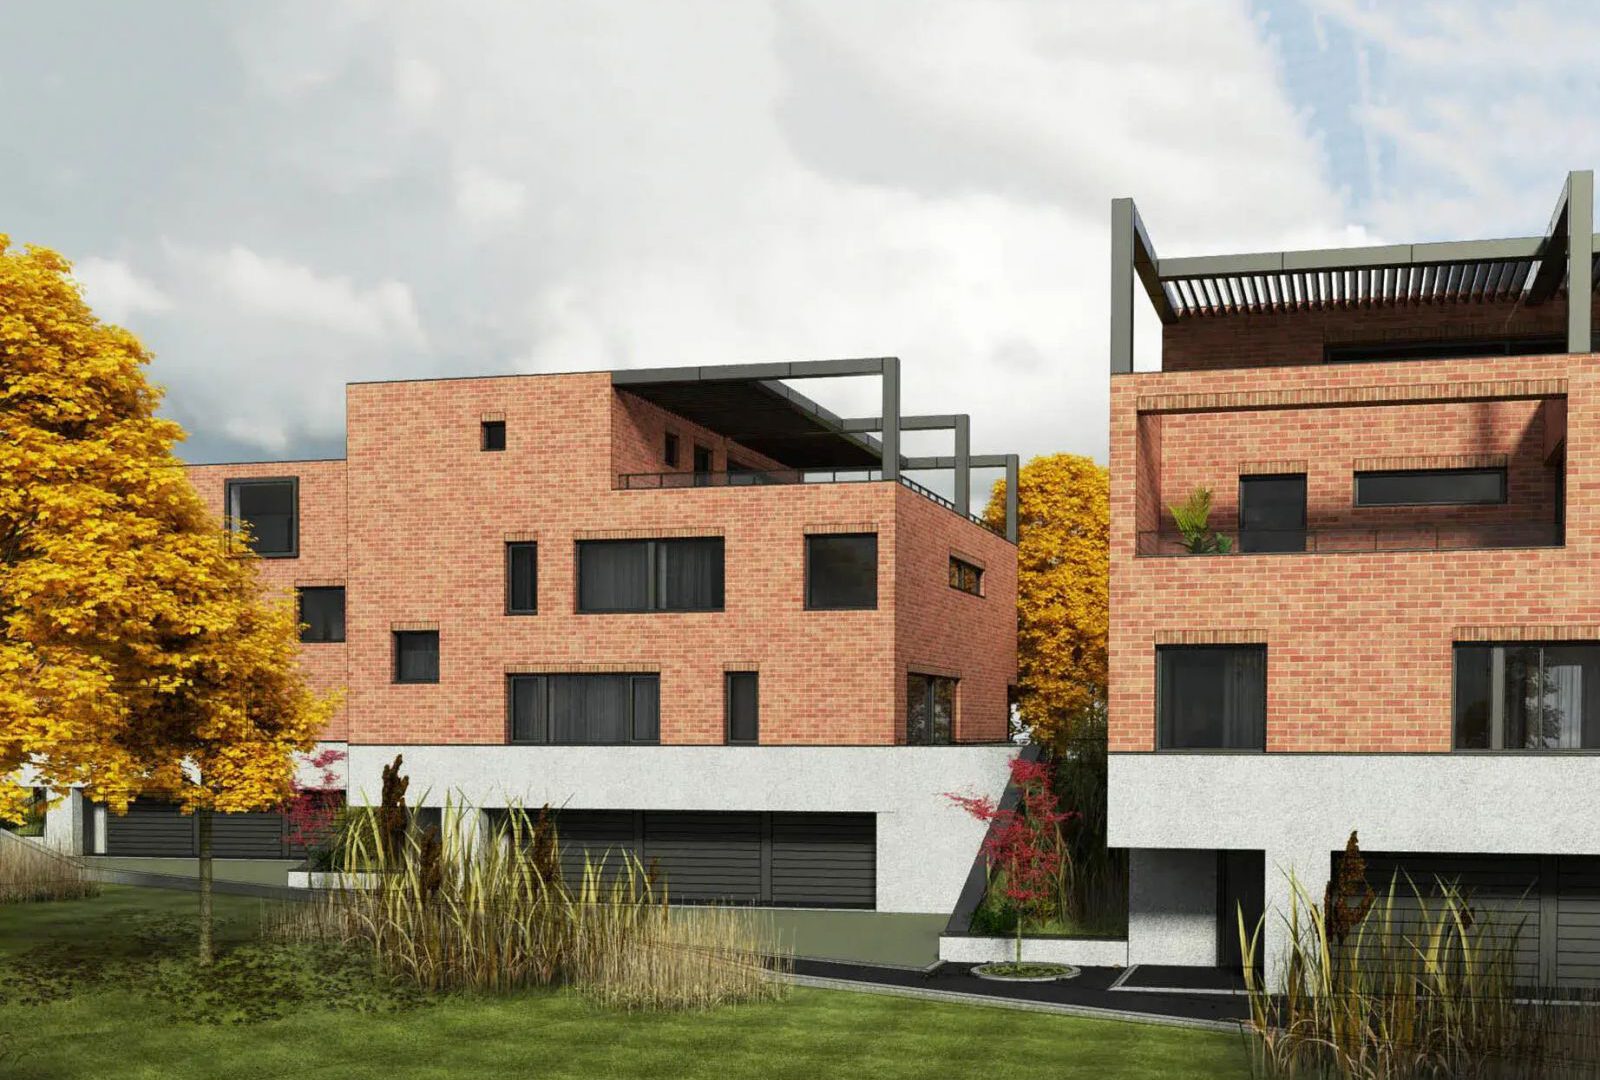 The exclusive Bratislava project Wachtmeister brings to the market town villas with private gardens